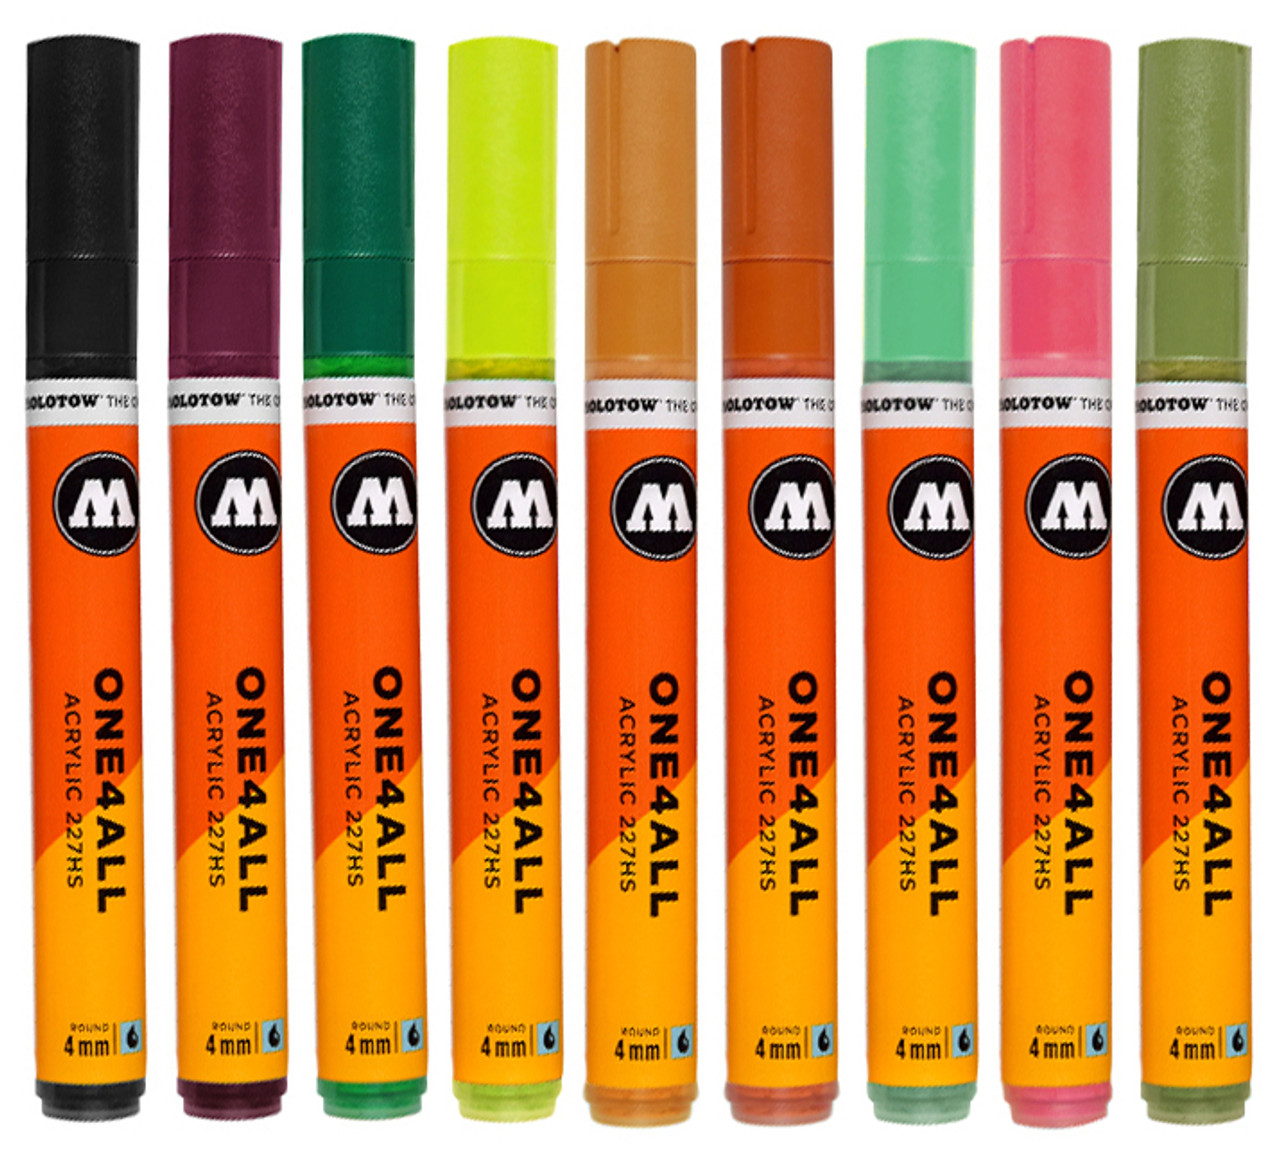 Molotow 2mm One4All Acrylic Paint Marker (Multiple Colors Available) – Fan  HQ